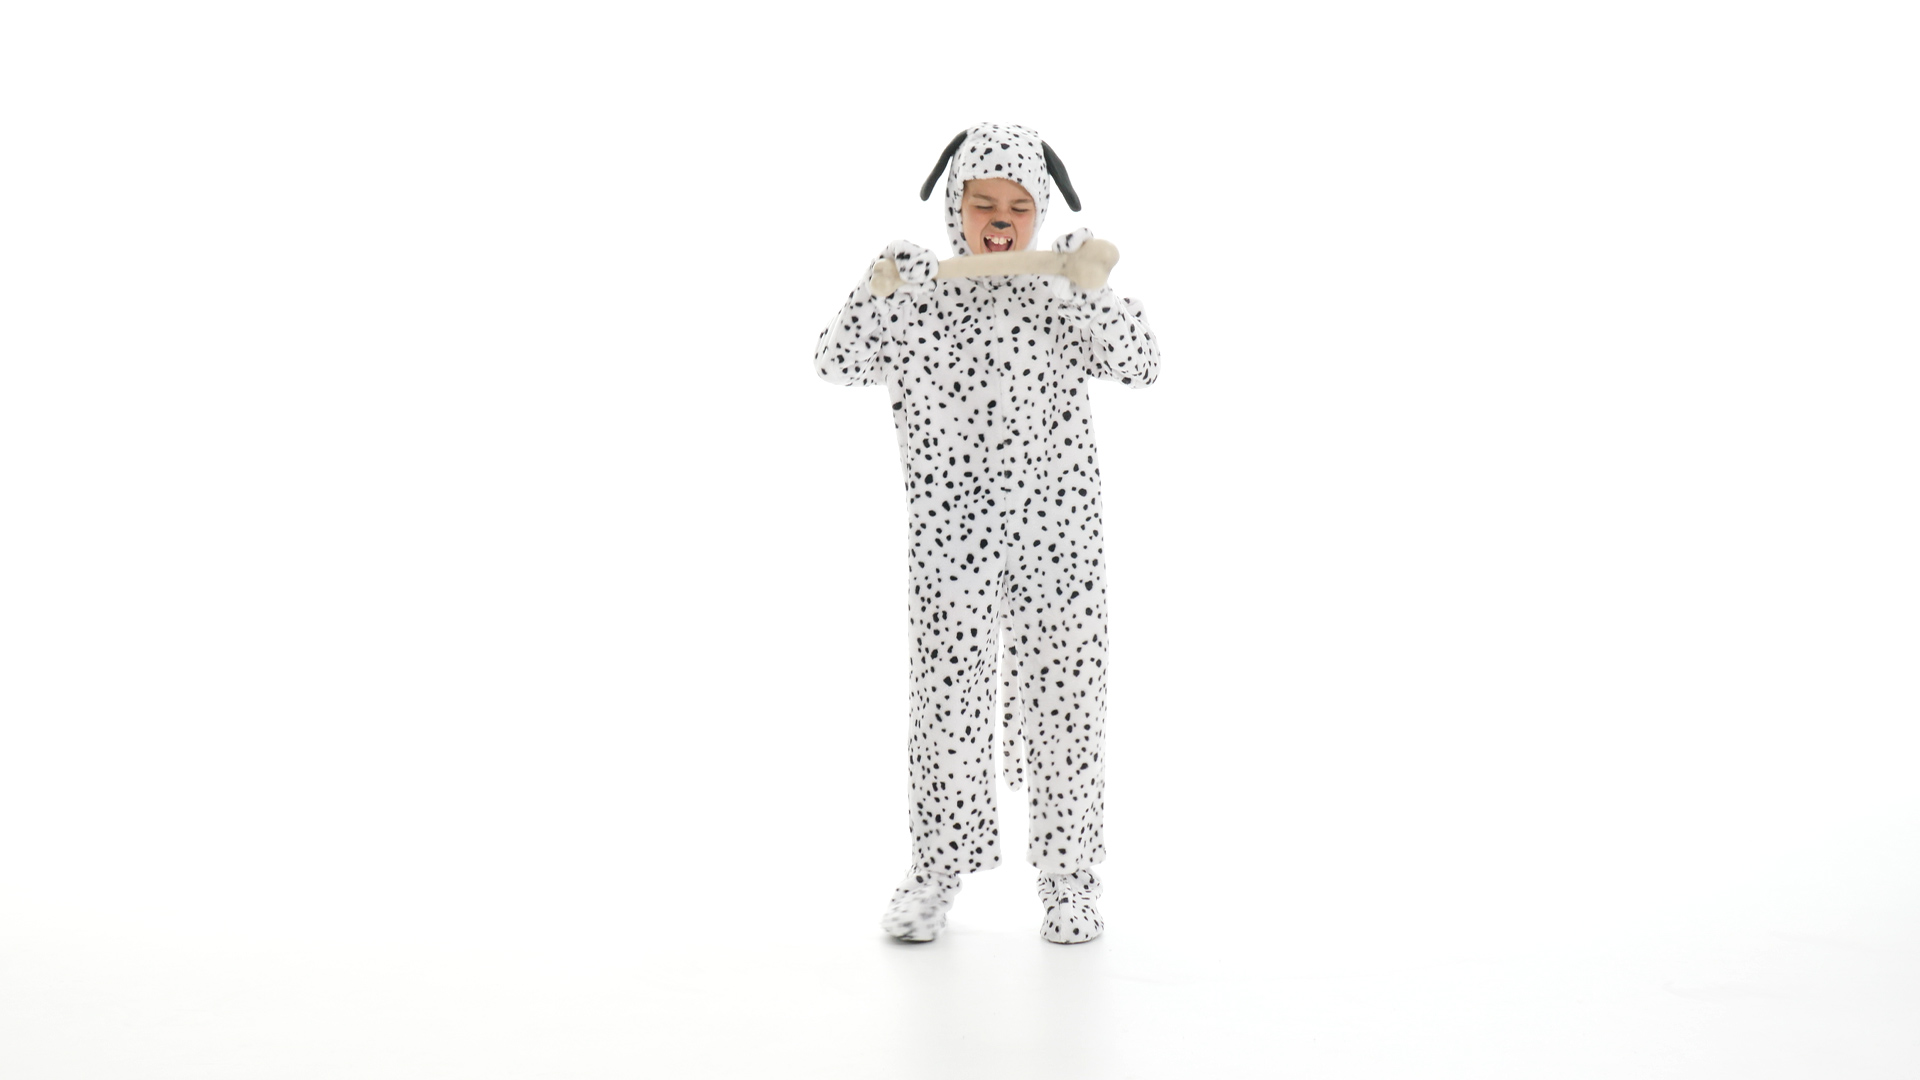 When you wear our Kids Dalmatian Costume, you can say you've been spotted! It's a great look for dog lovers this Halloween.